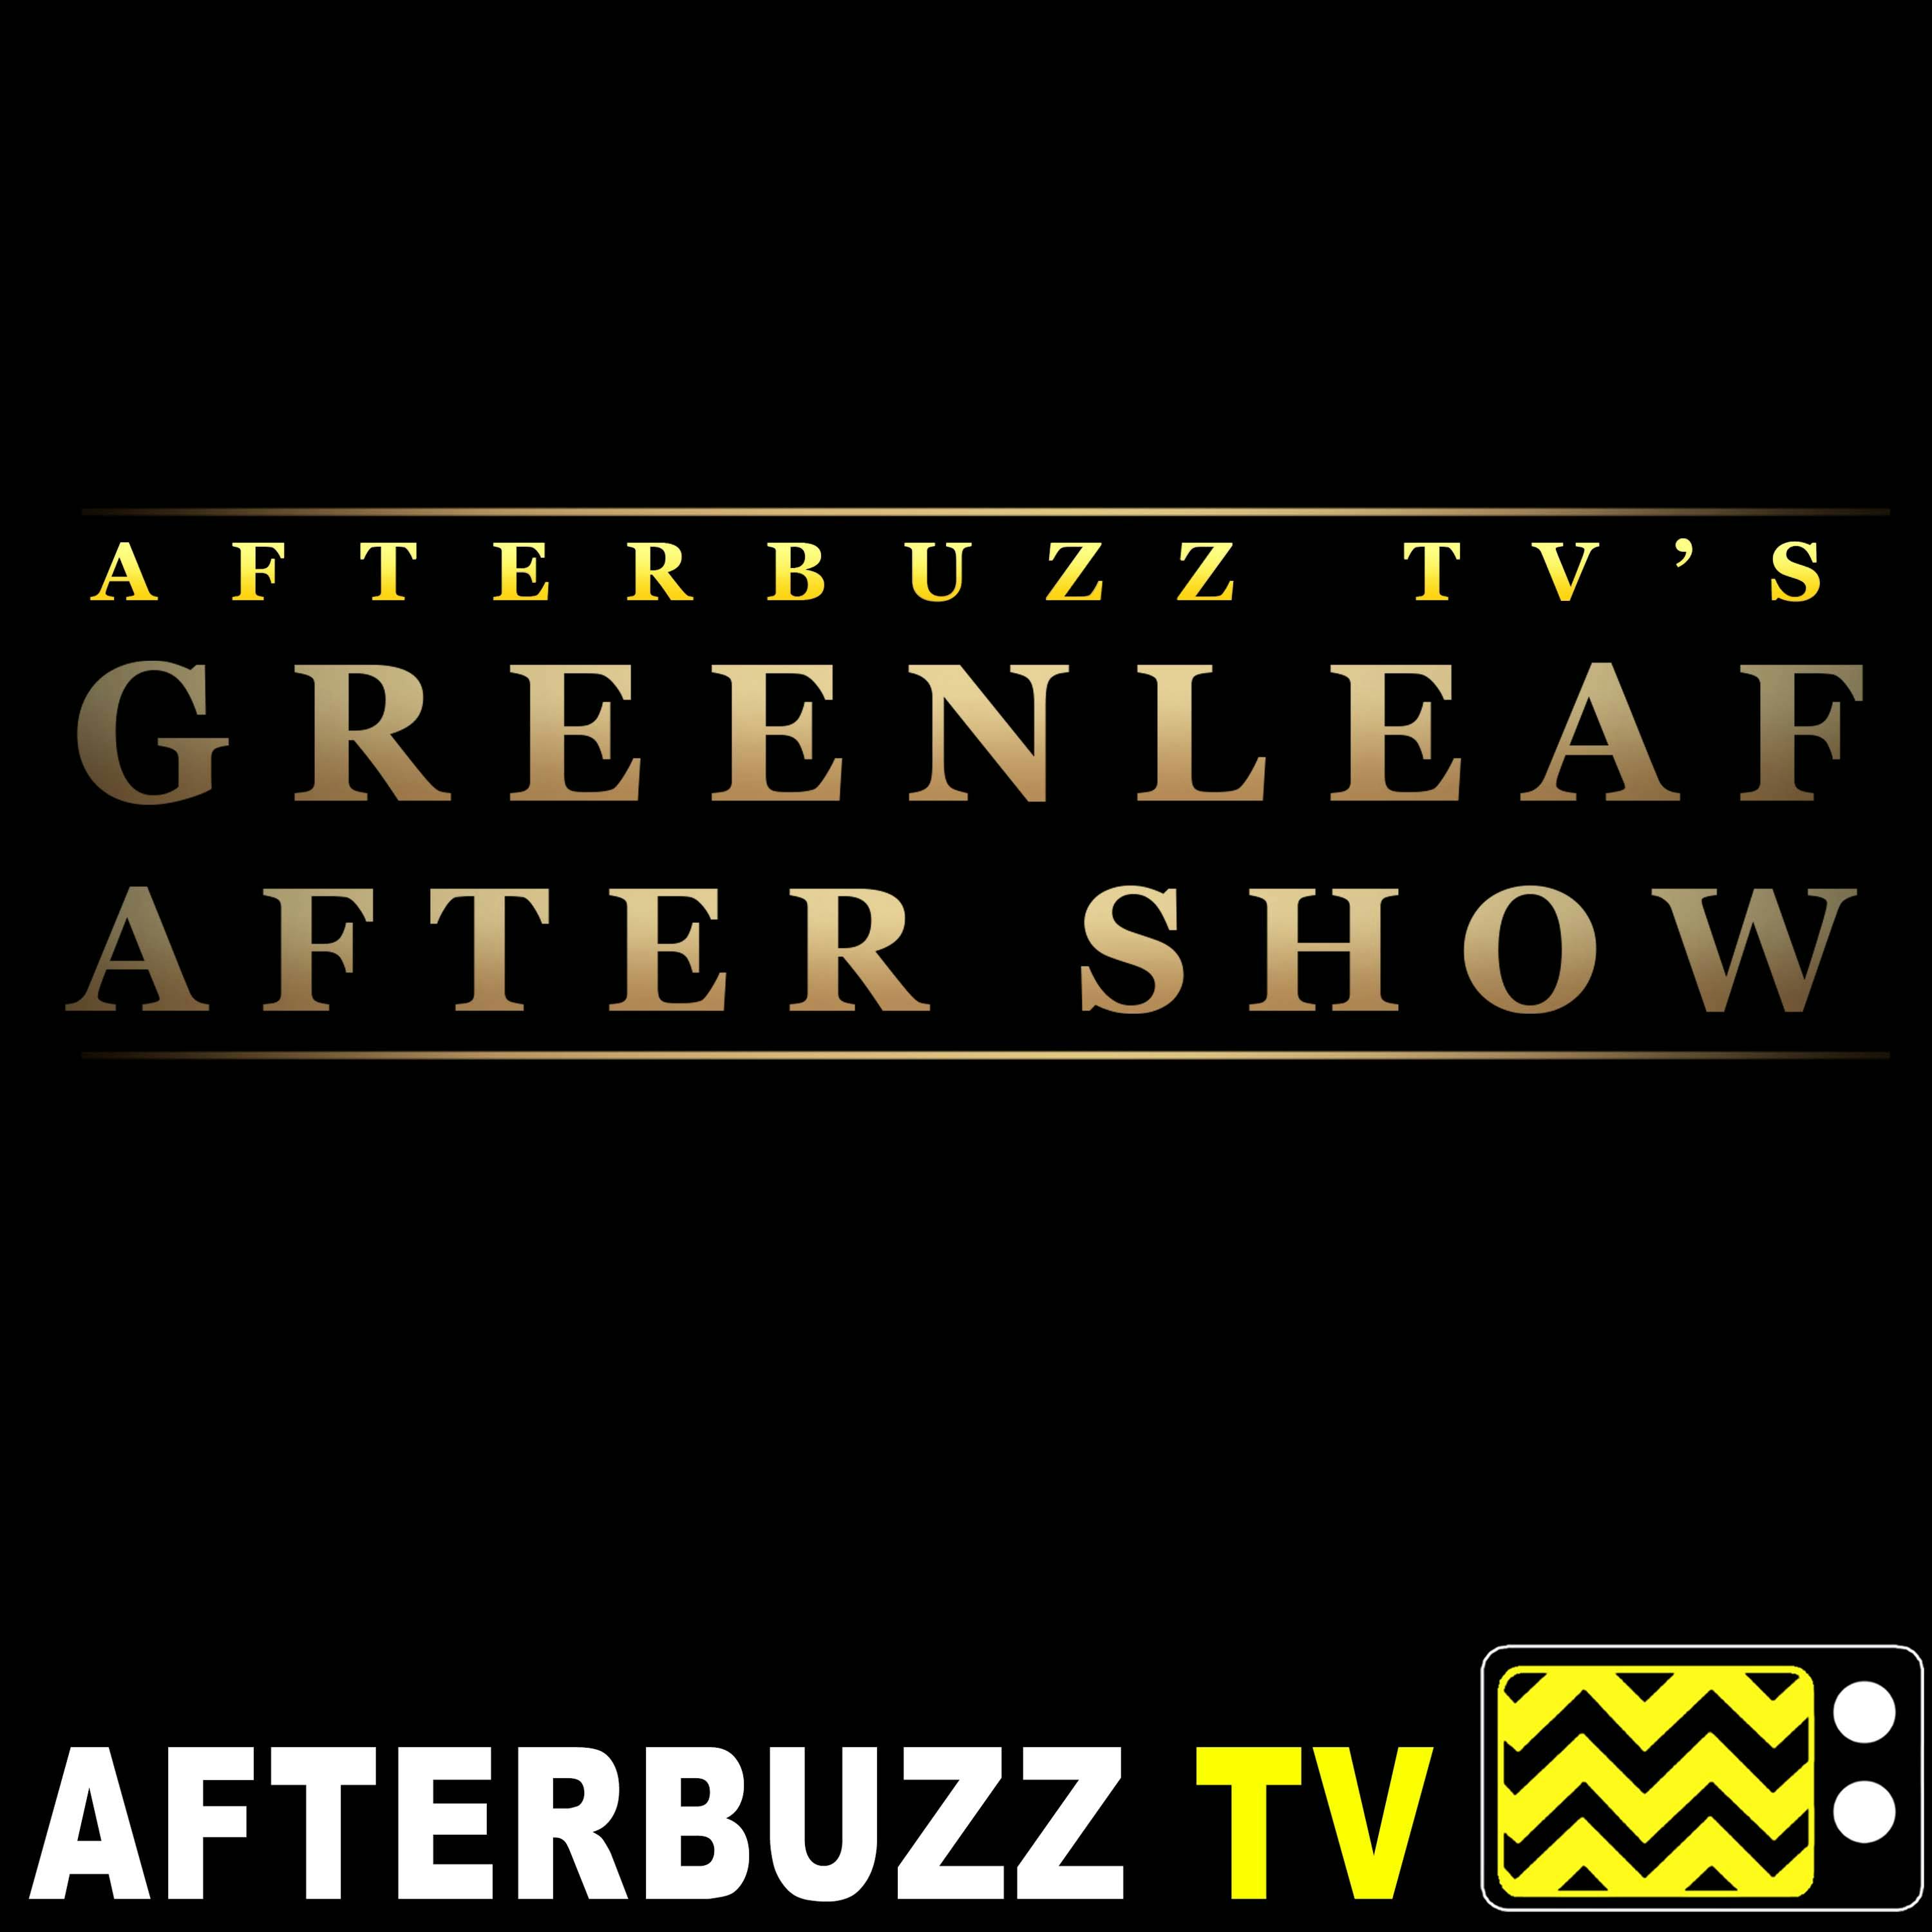 Greenleaf S5 E2 Recap & After Show: The First Day